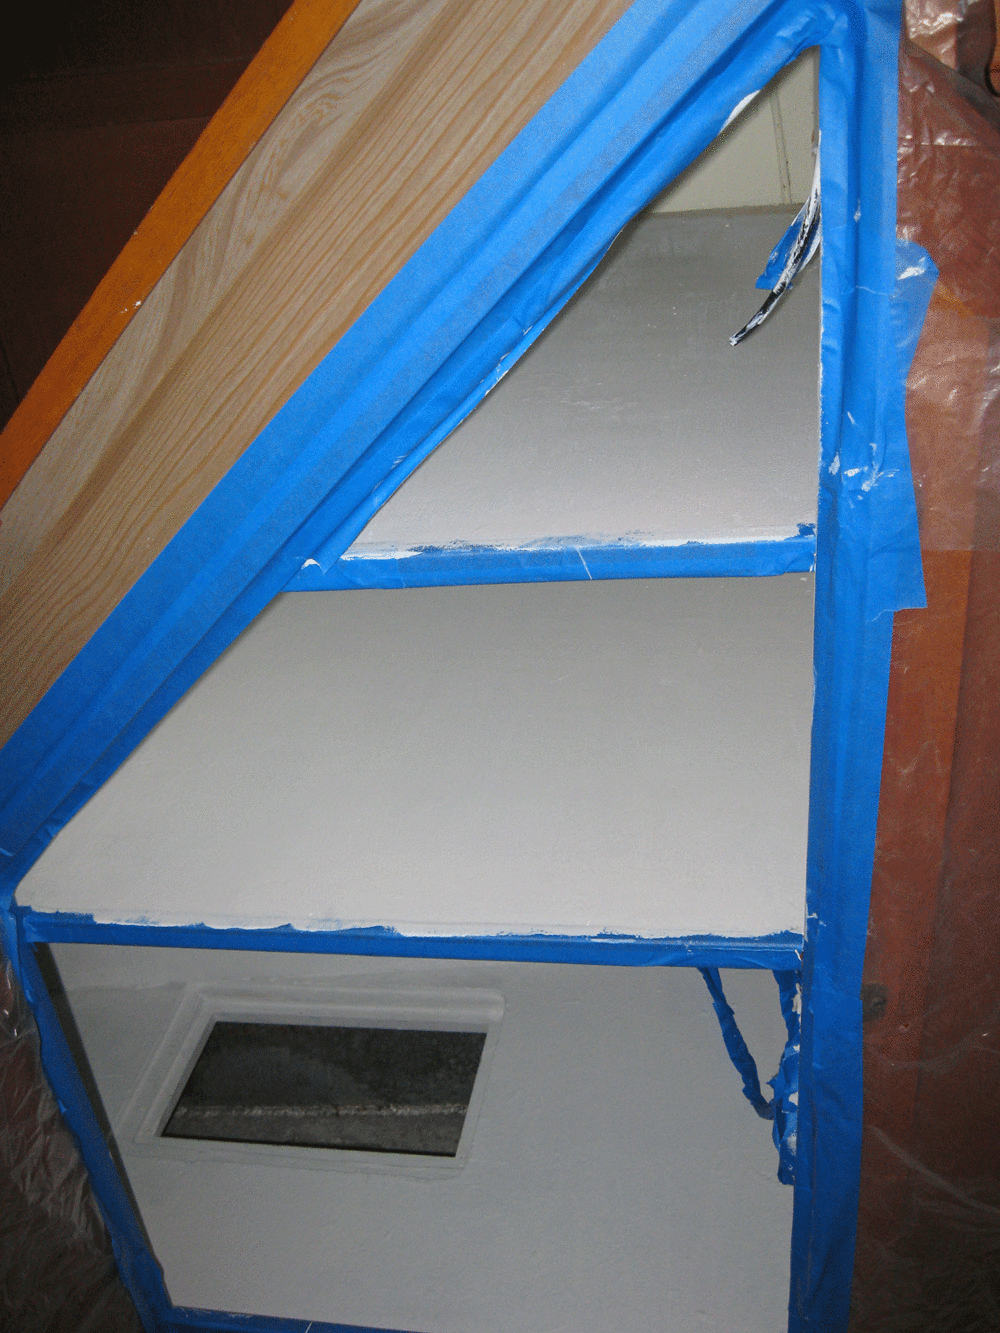 Cupboard being painted on boat